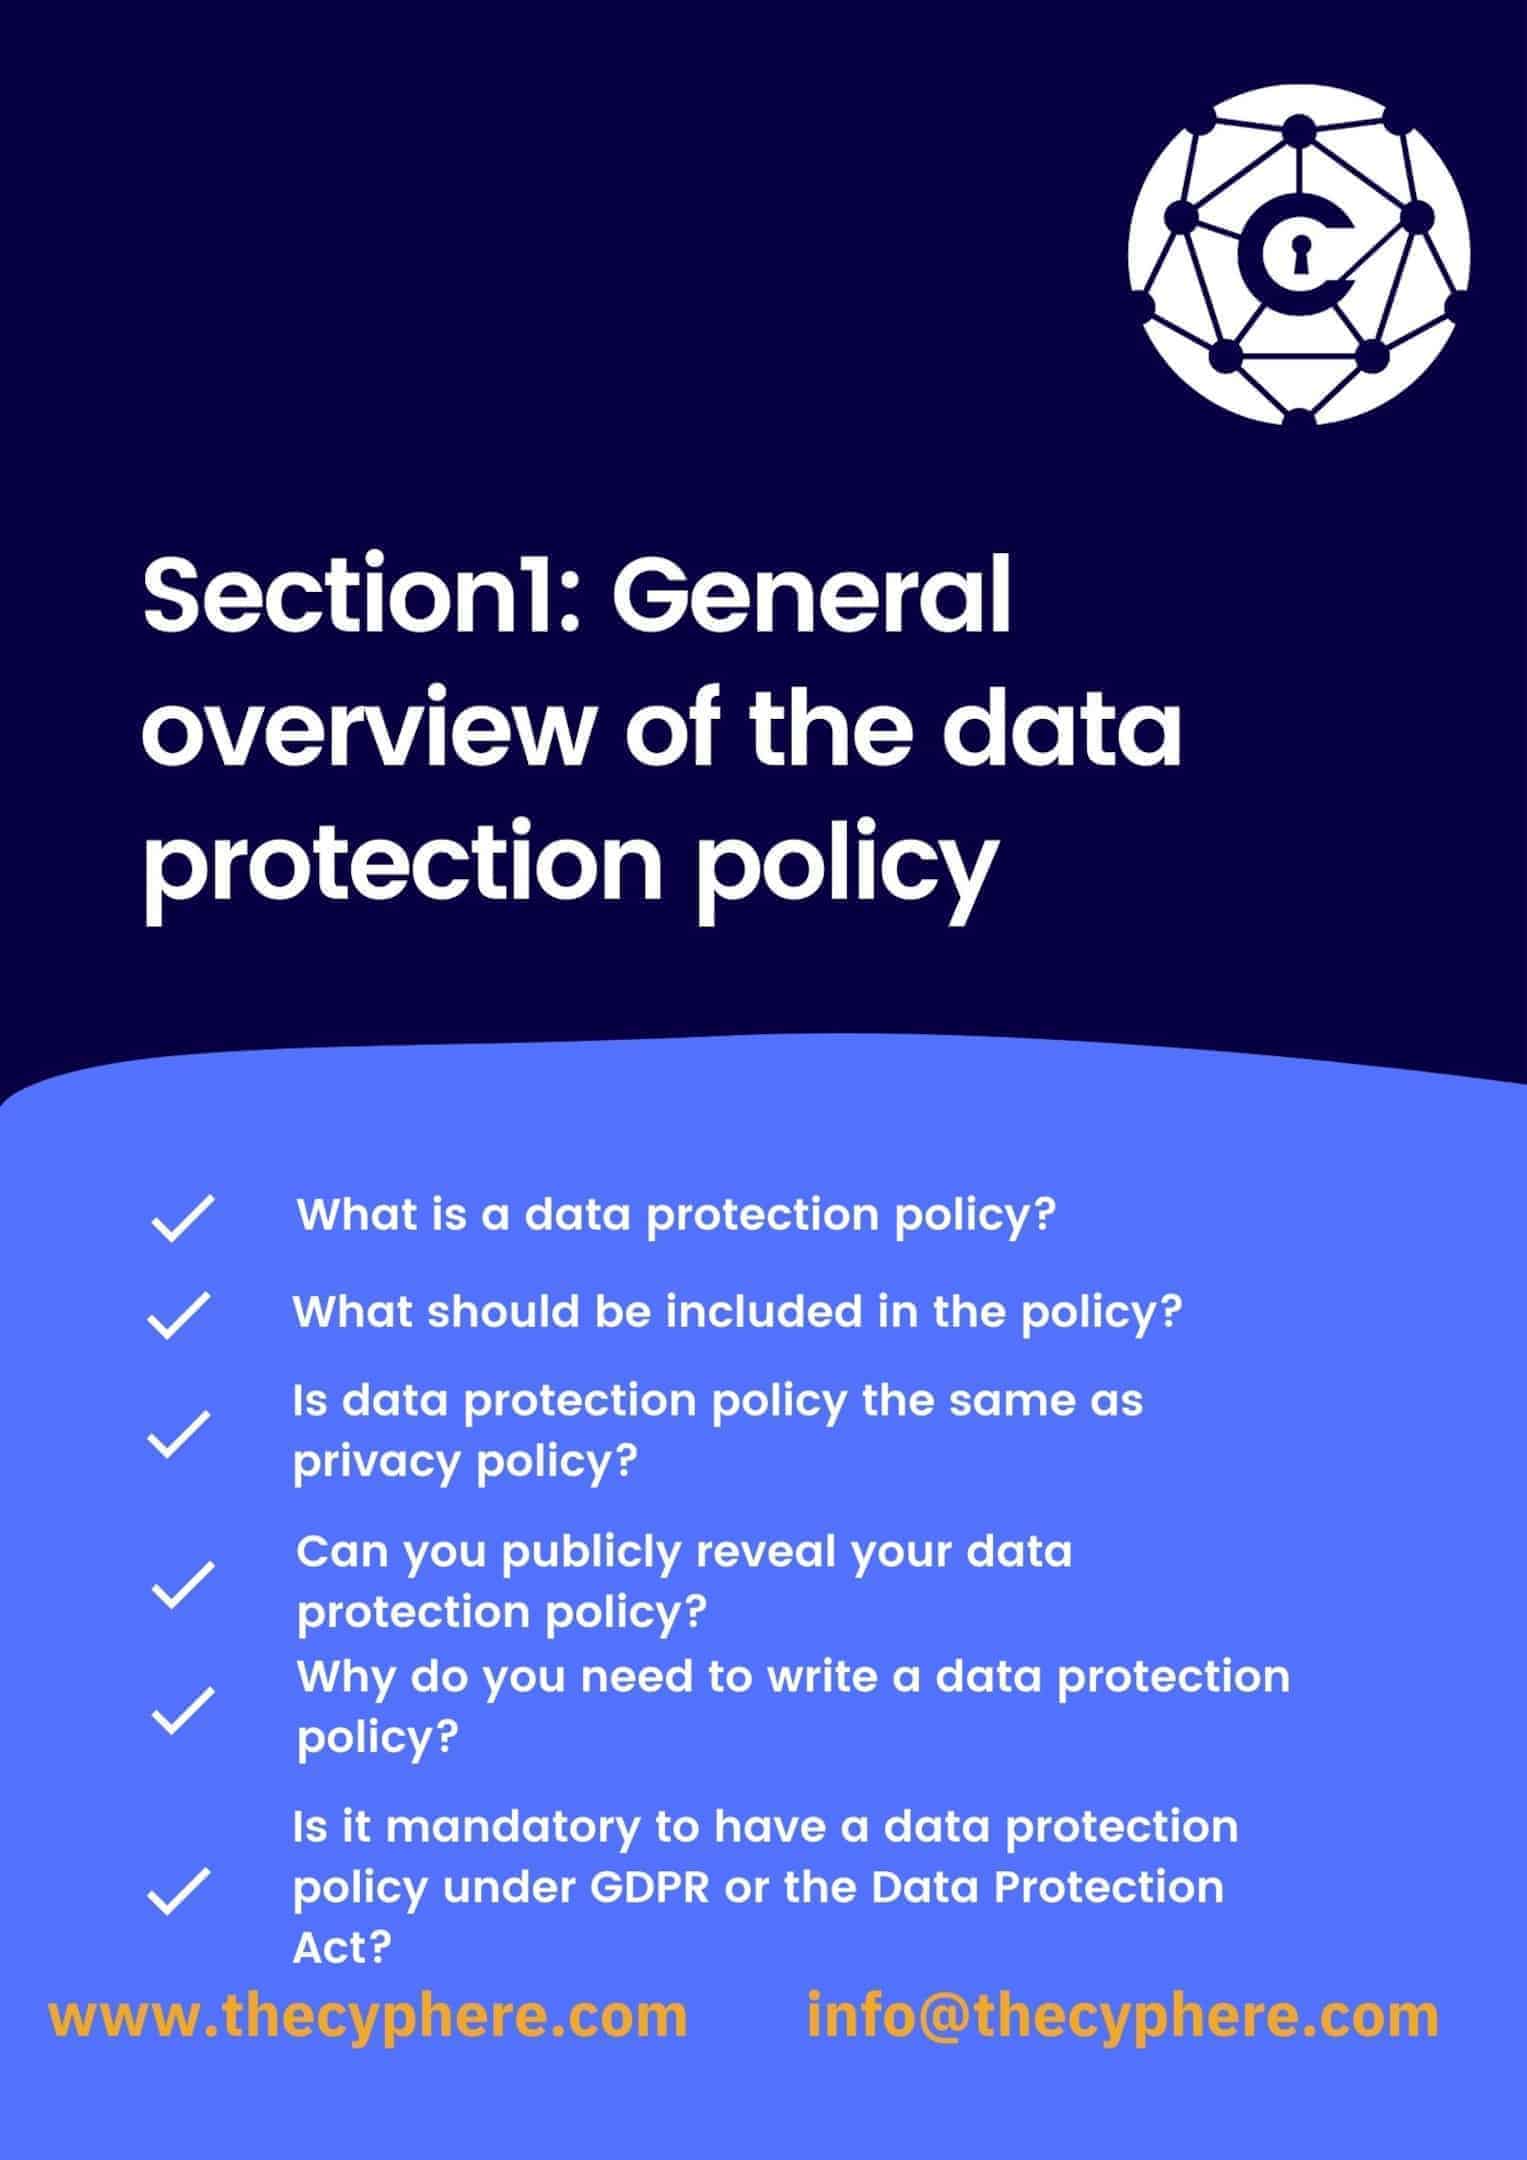 General overview of the data protection policy